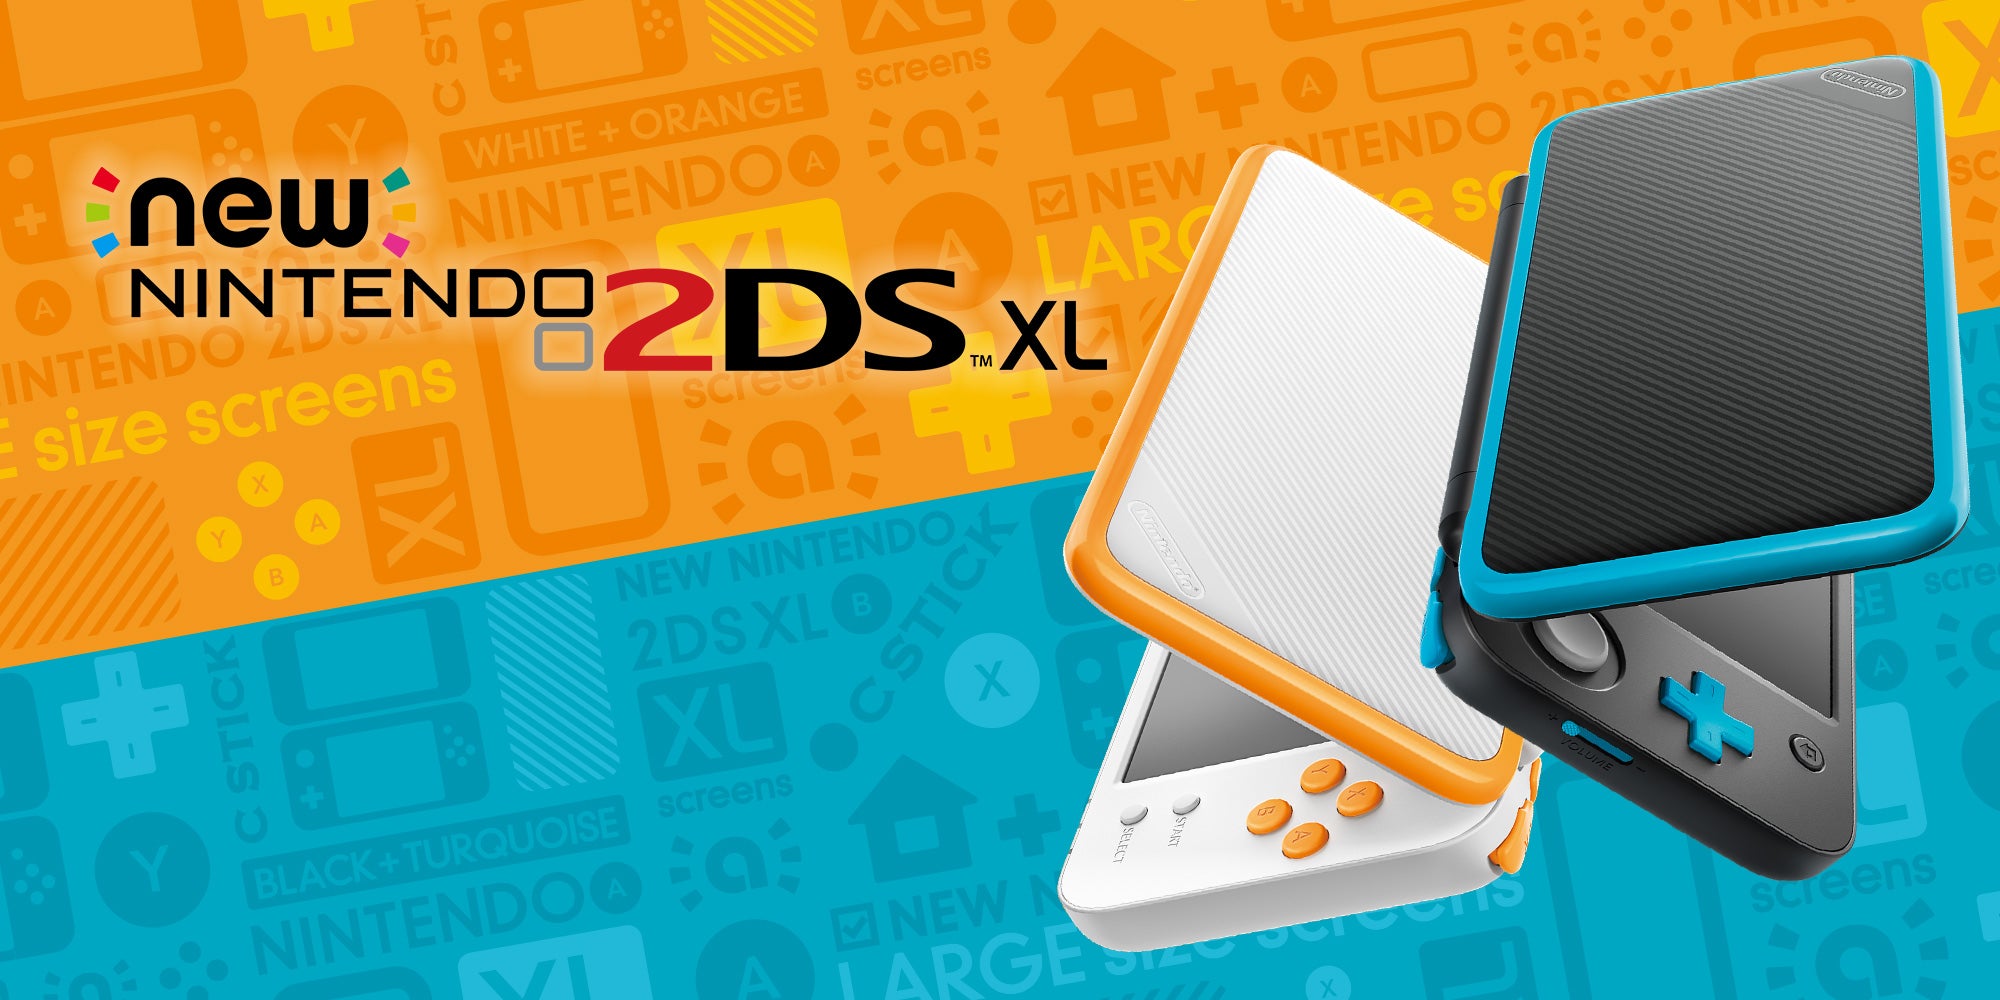 Image for Nintendo has plans to support the 3DS "well beyond 2018"